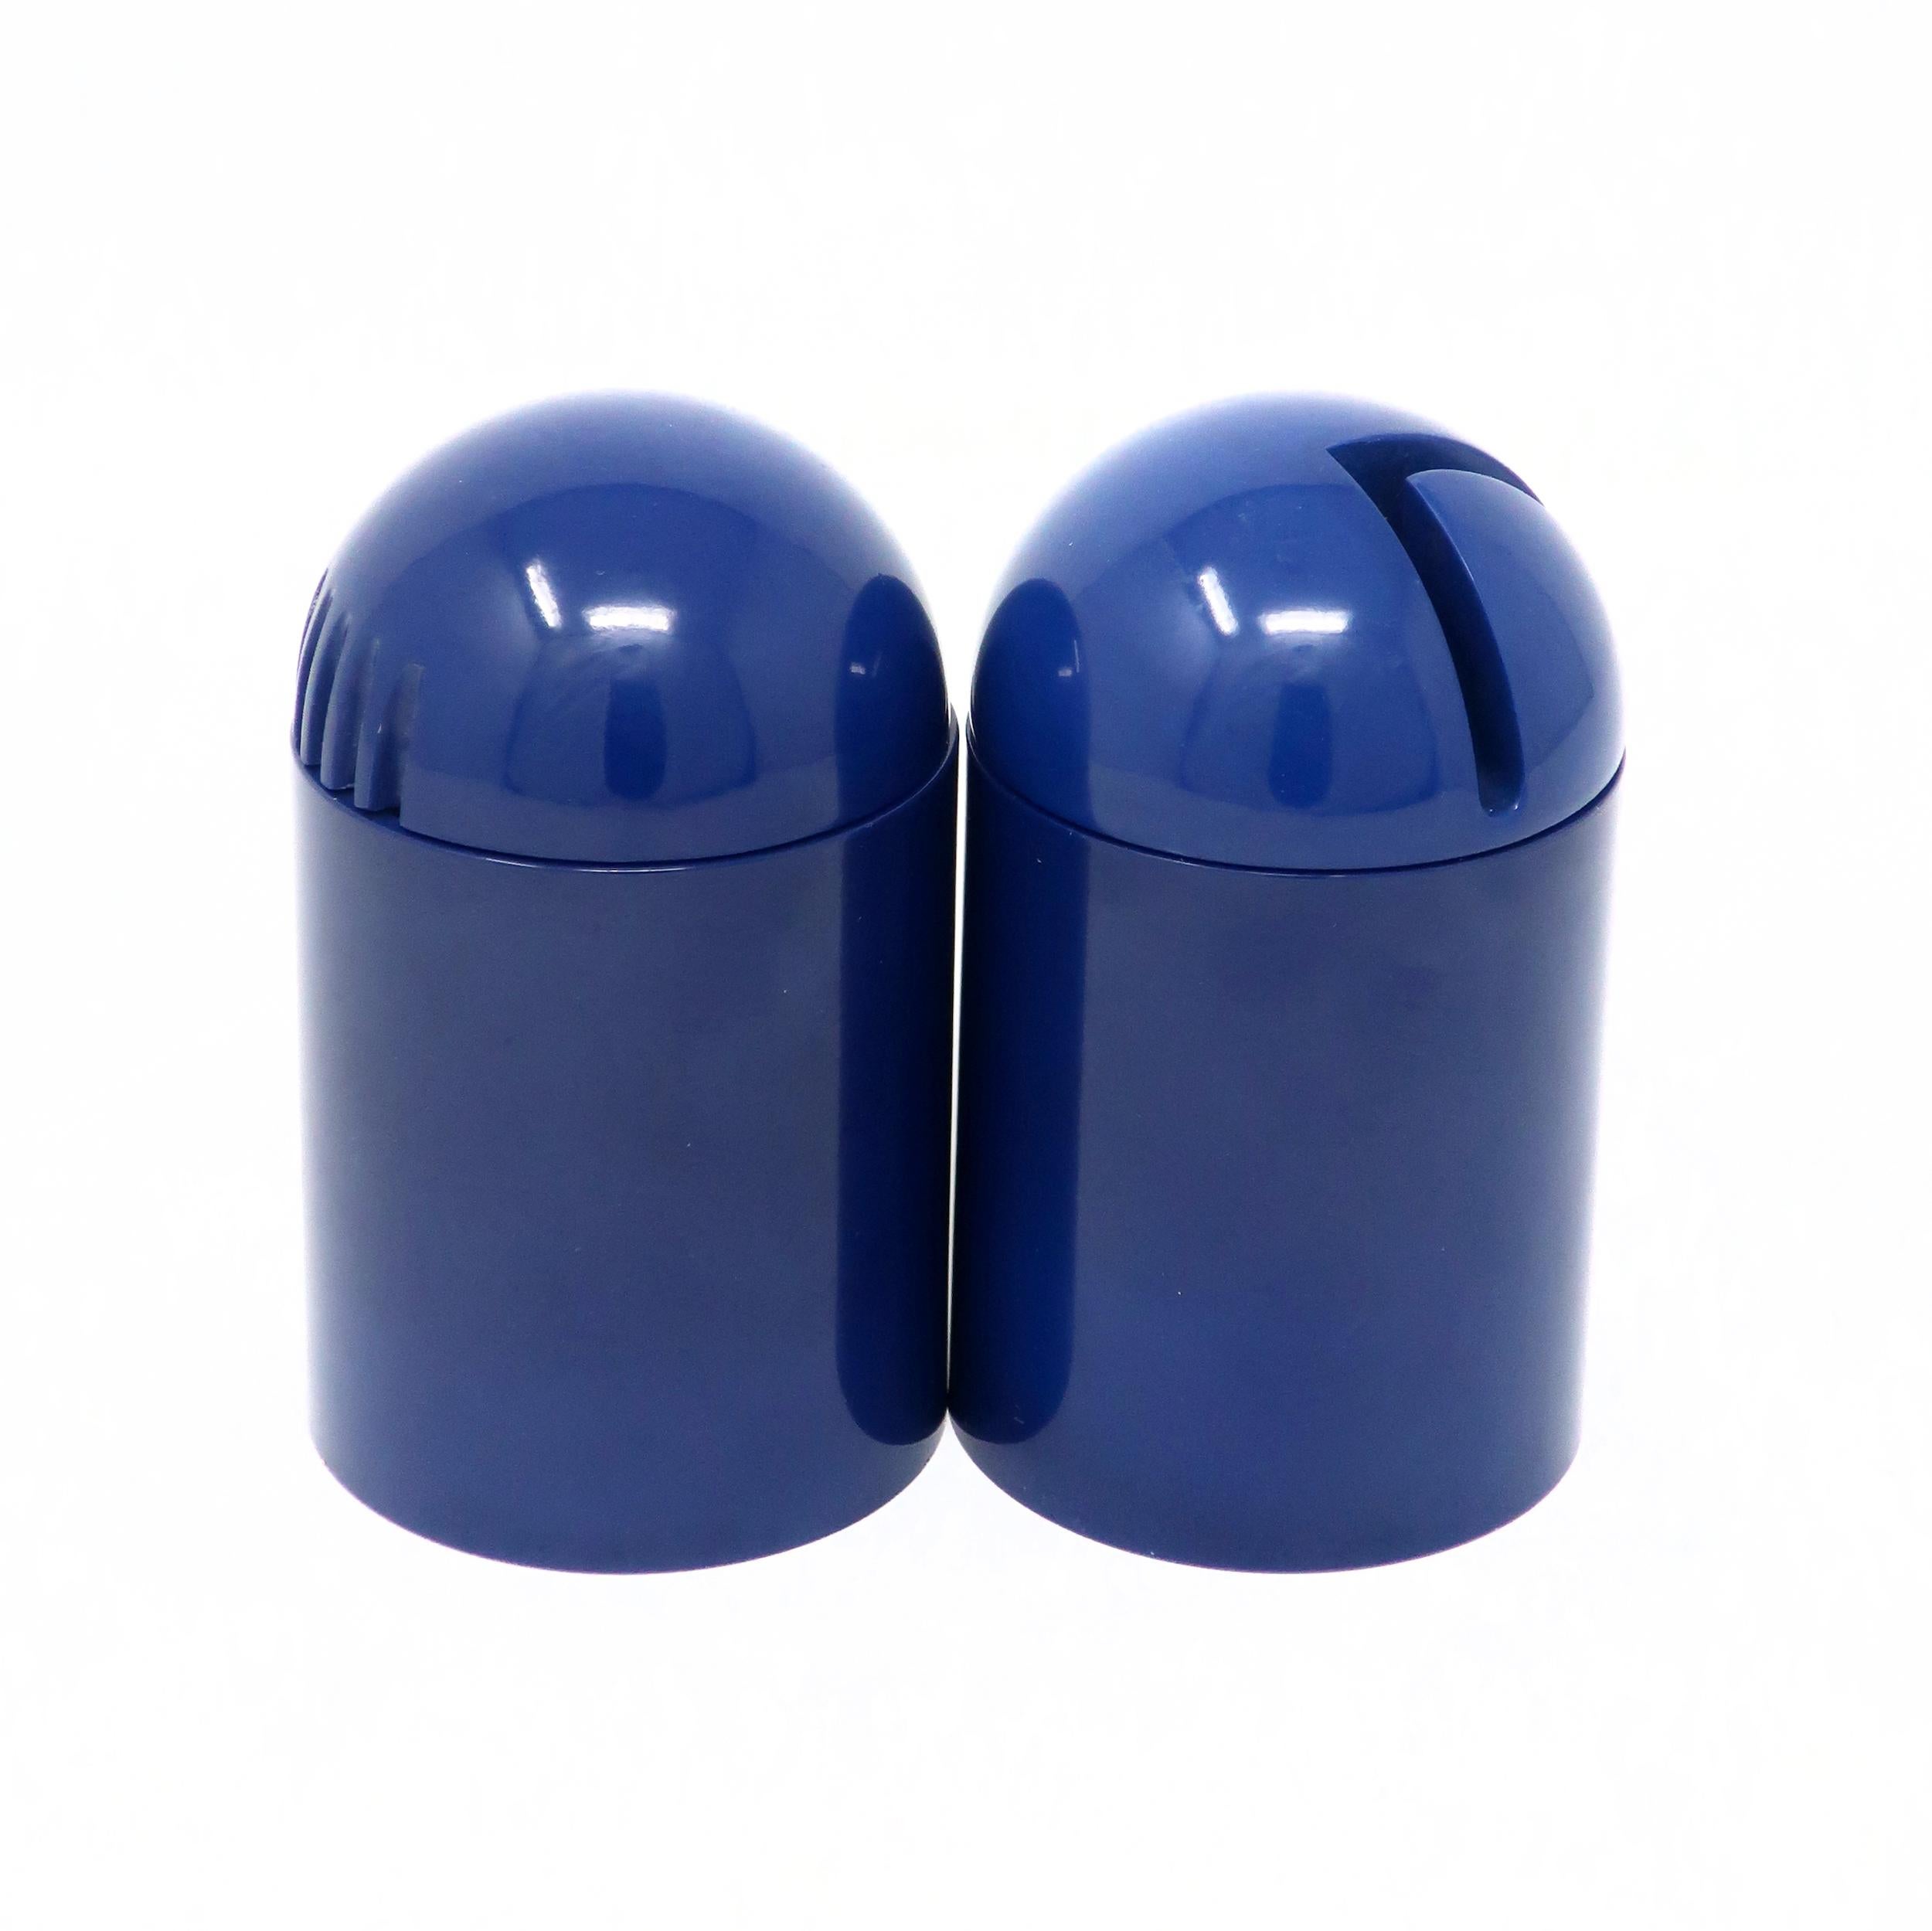 Vintage Blue Salt Shaker & Pepper Grinder by Enzo Mari In Good Condition For Sale In Brooklyn, NY